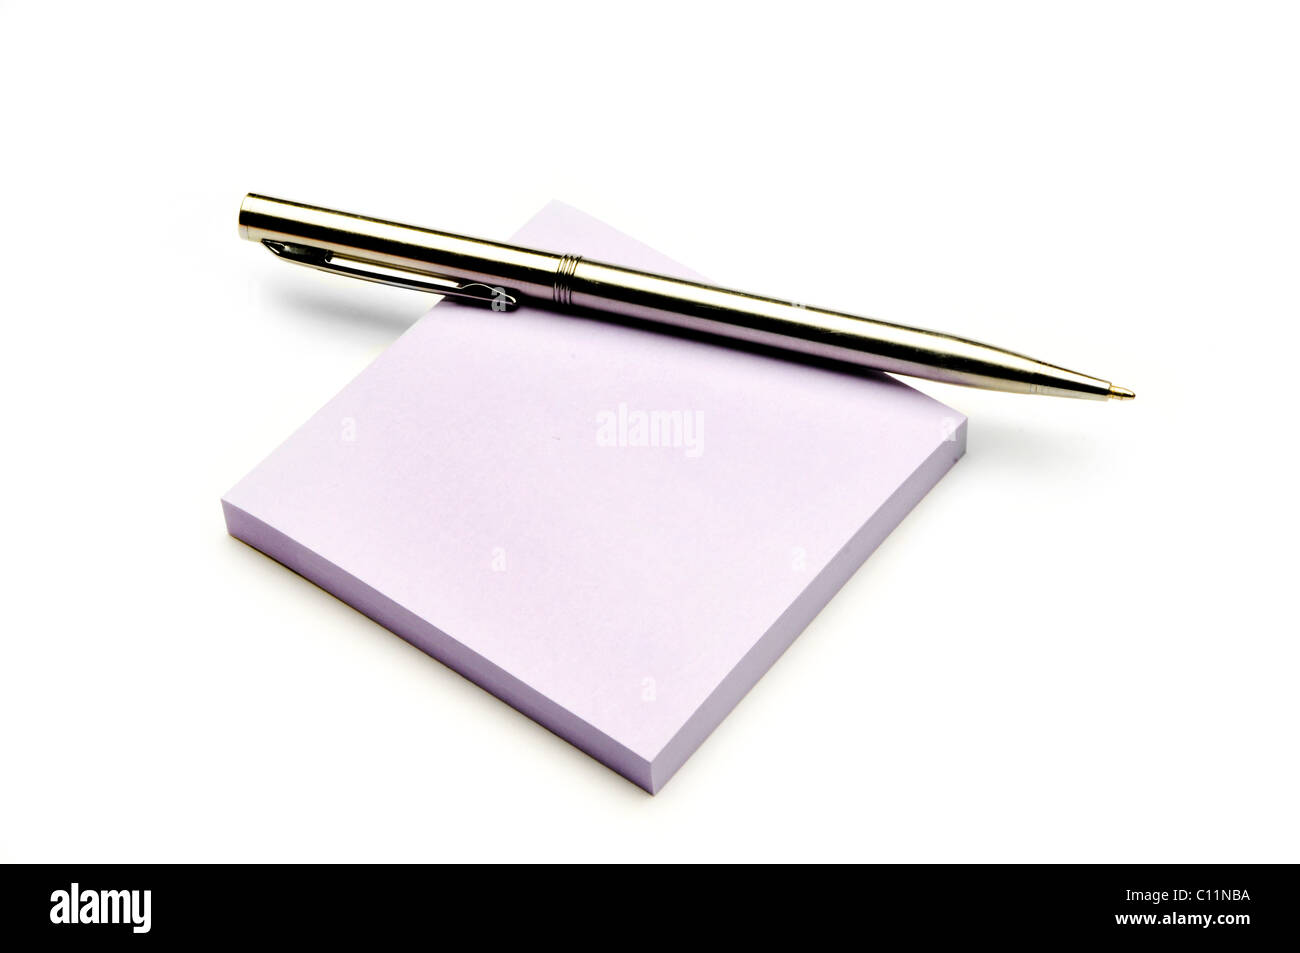 silver writing pen on colored note pad Stock Photo